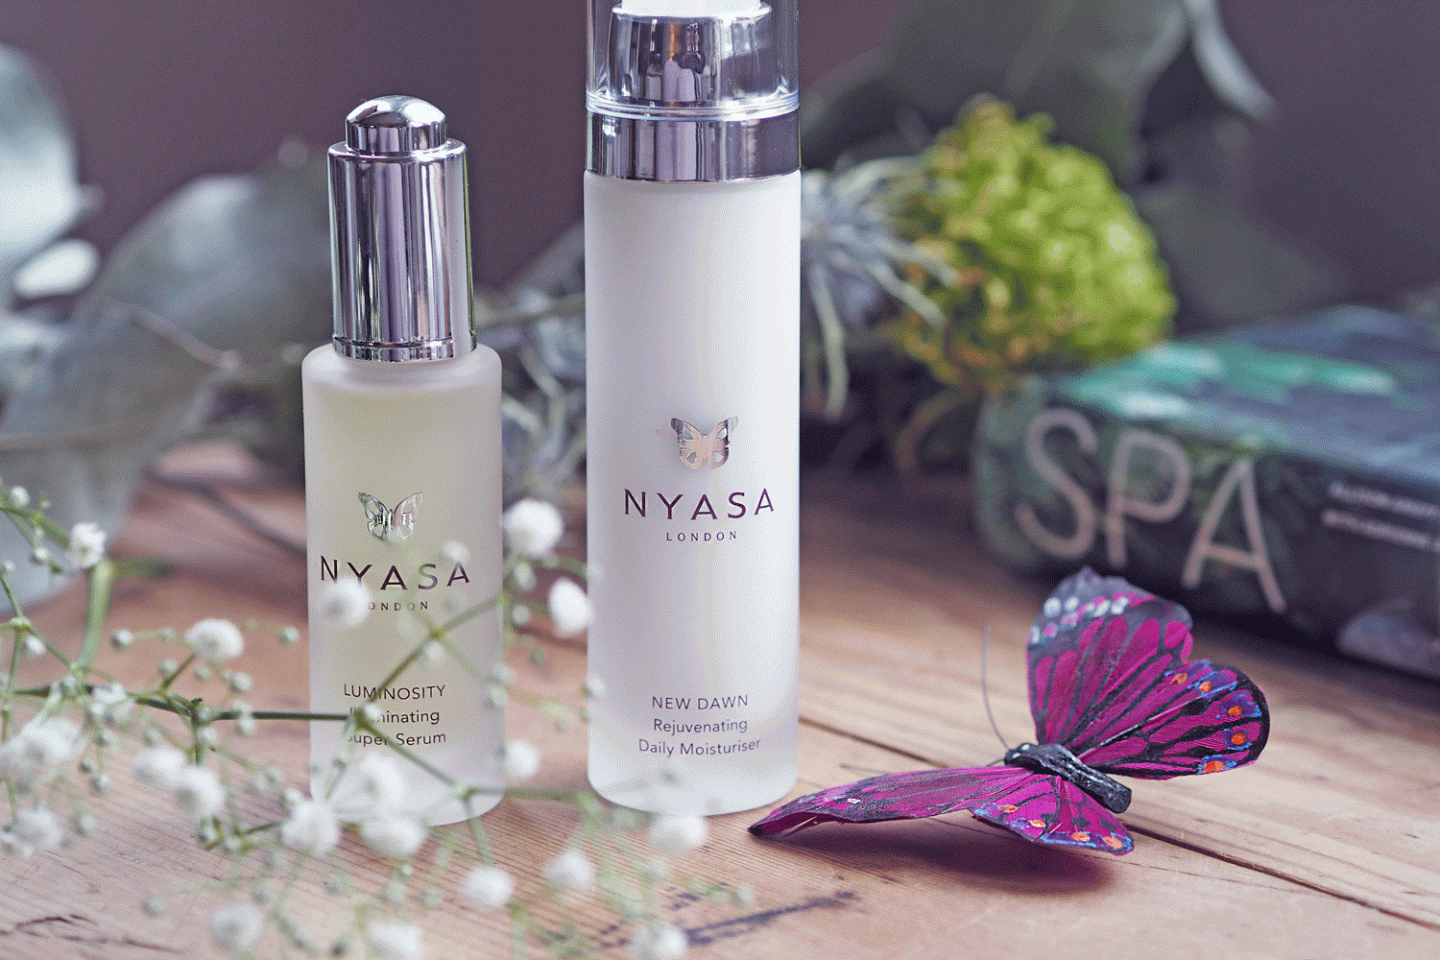 Nyasa skincare products & butterfly